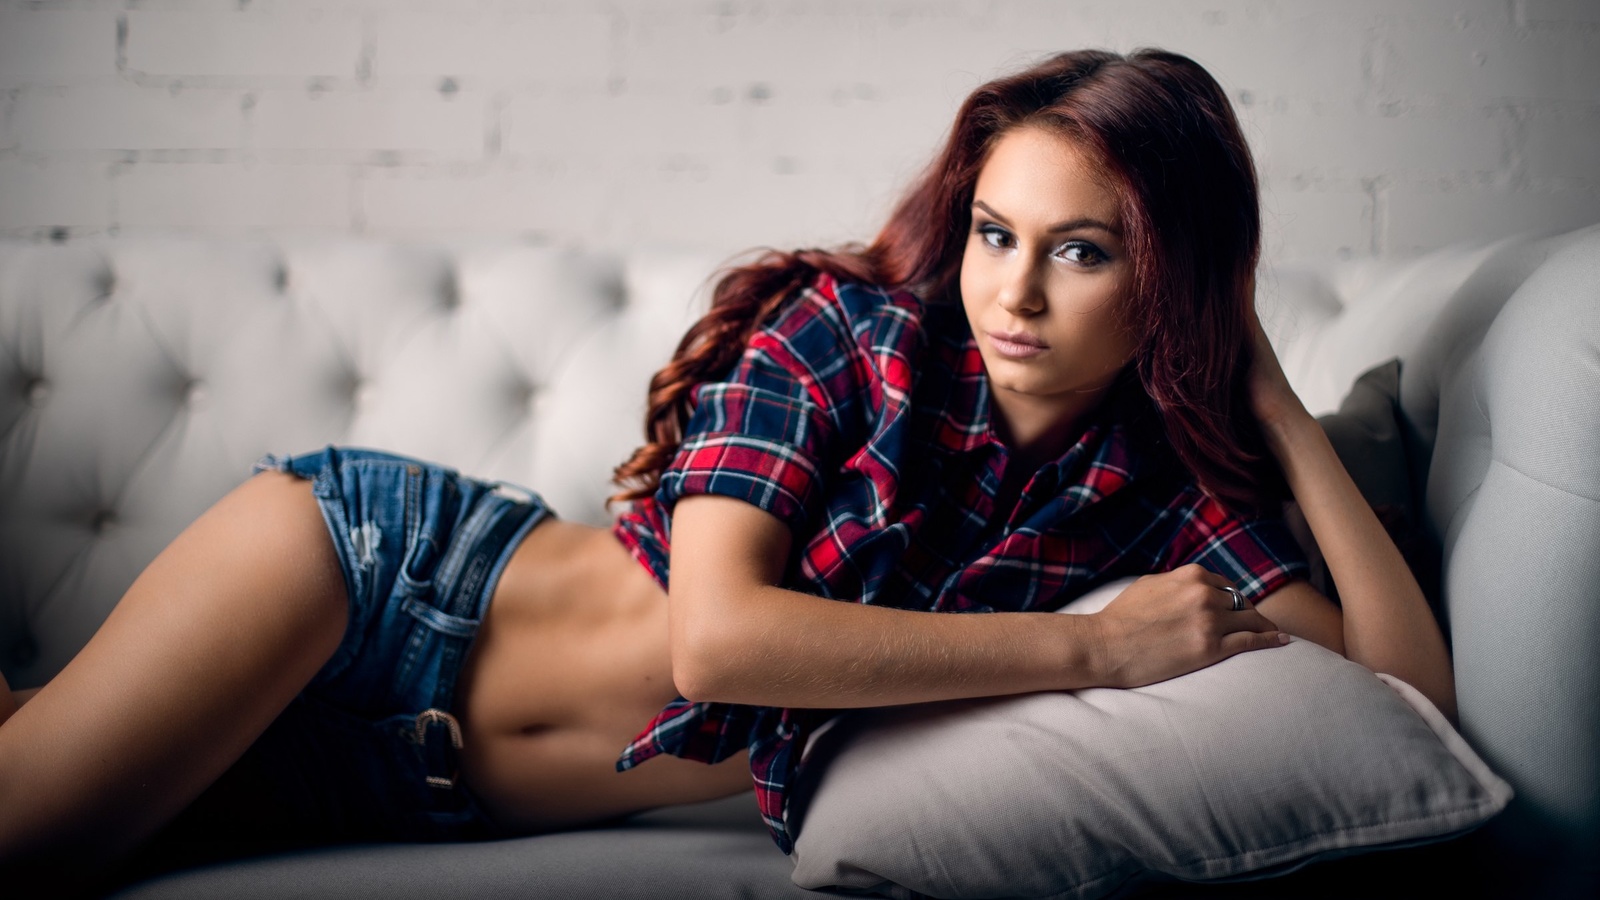 women, tanned, jean shorts, plaid shirt, belly, couch, pink lipstick, dyed hair, wall, bricks